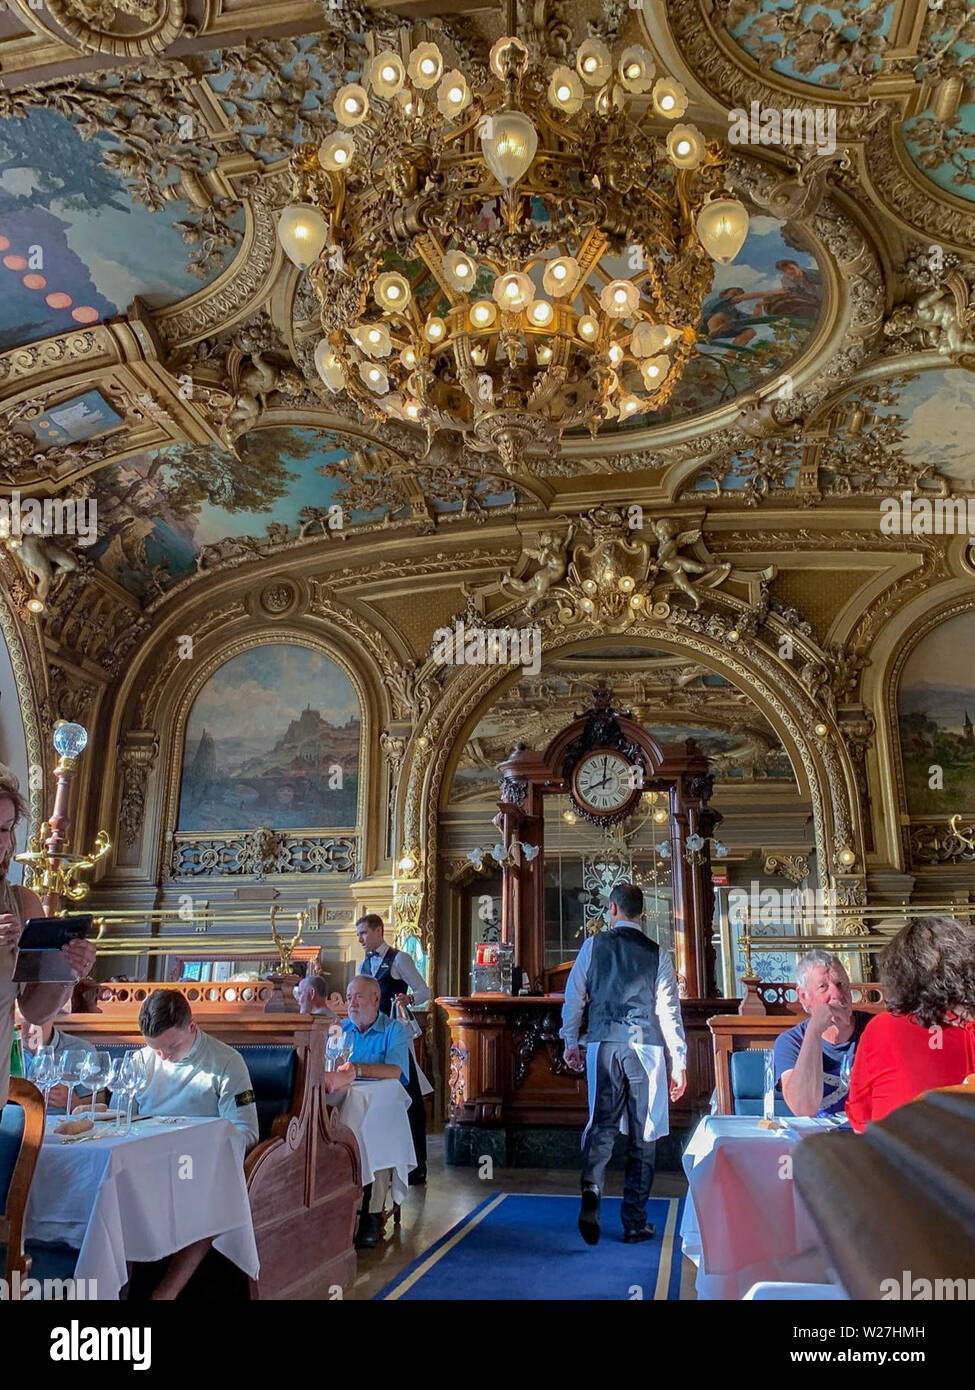 Paris, FRANCE,  People inside Traditional French Brasserie Restaurant interior, Le Grand Bleu, in Gare de Lyon, historic train station, paris traditional Stock Photo